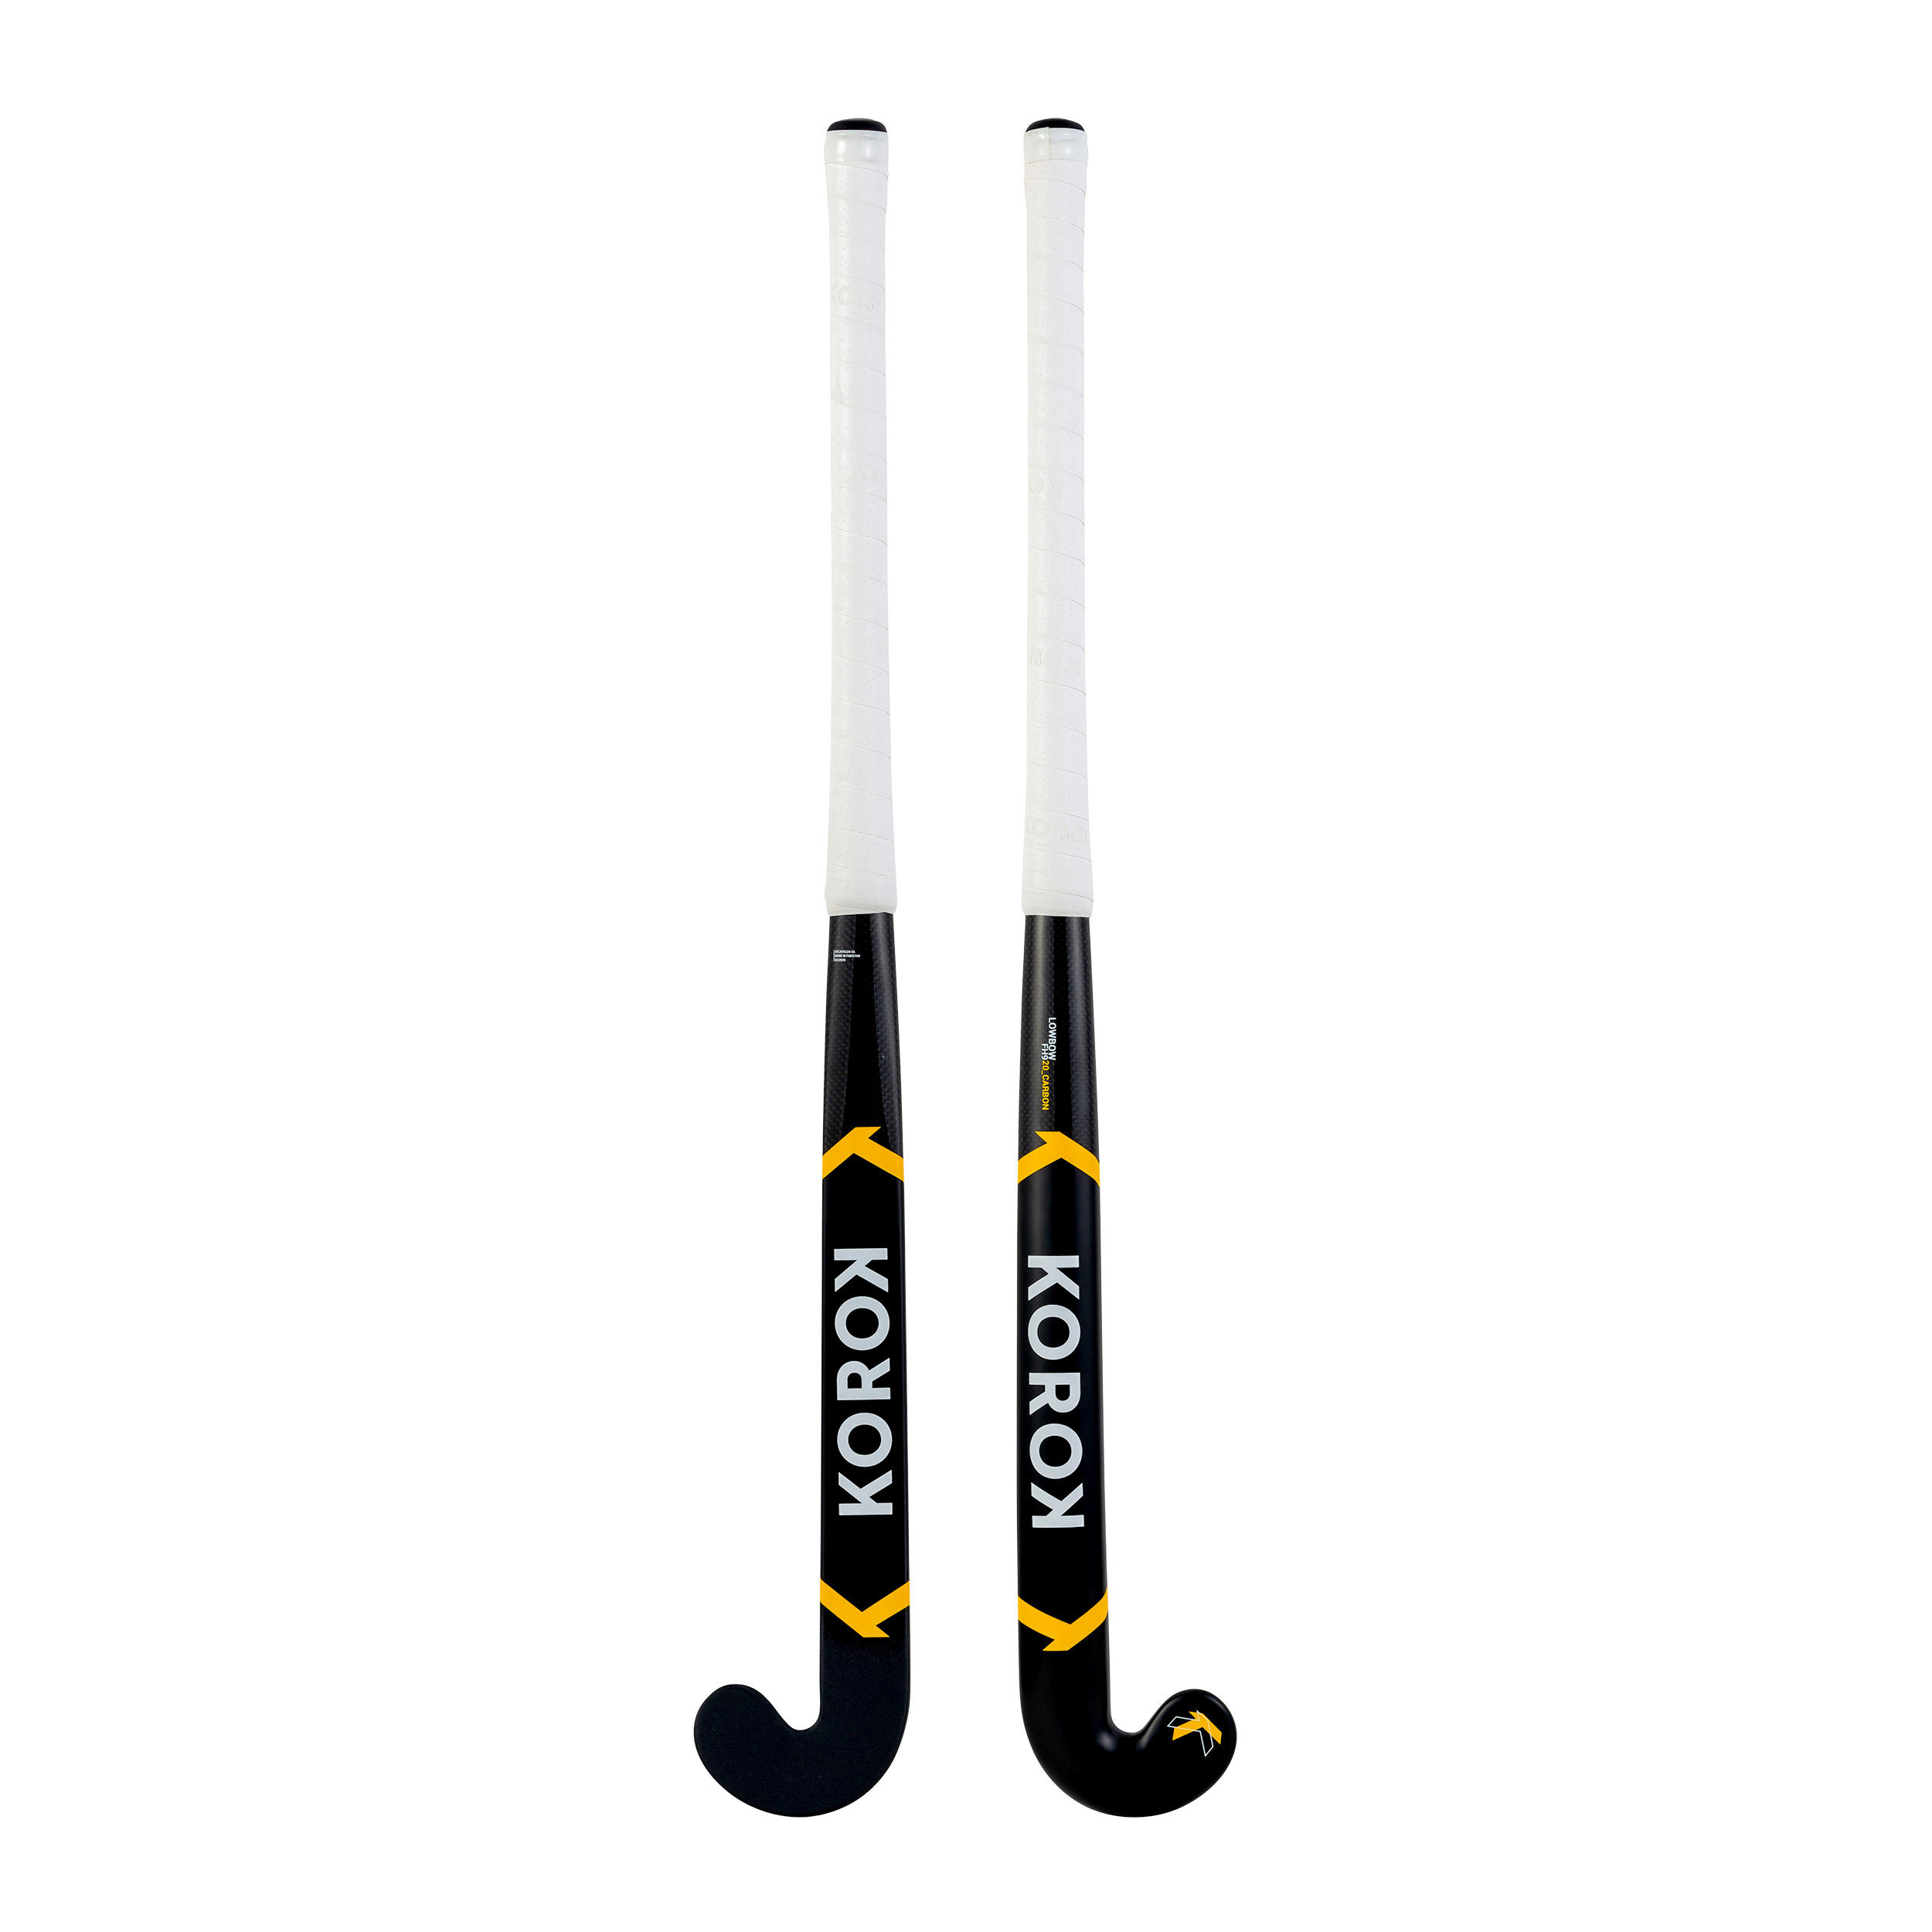 Kids' 20% Carbon Low Bow Field Hockey Stick FH920 - Black/Yellow 12/12